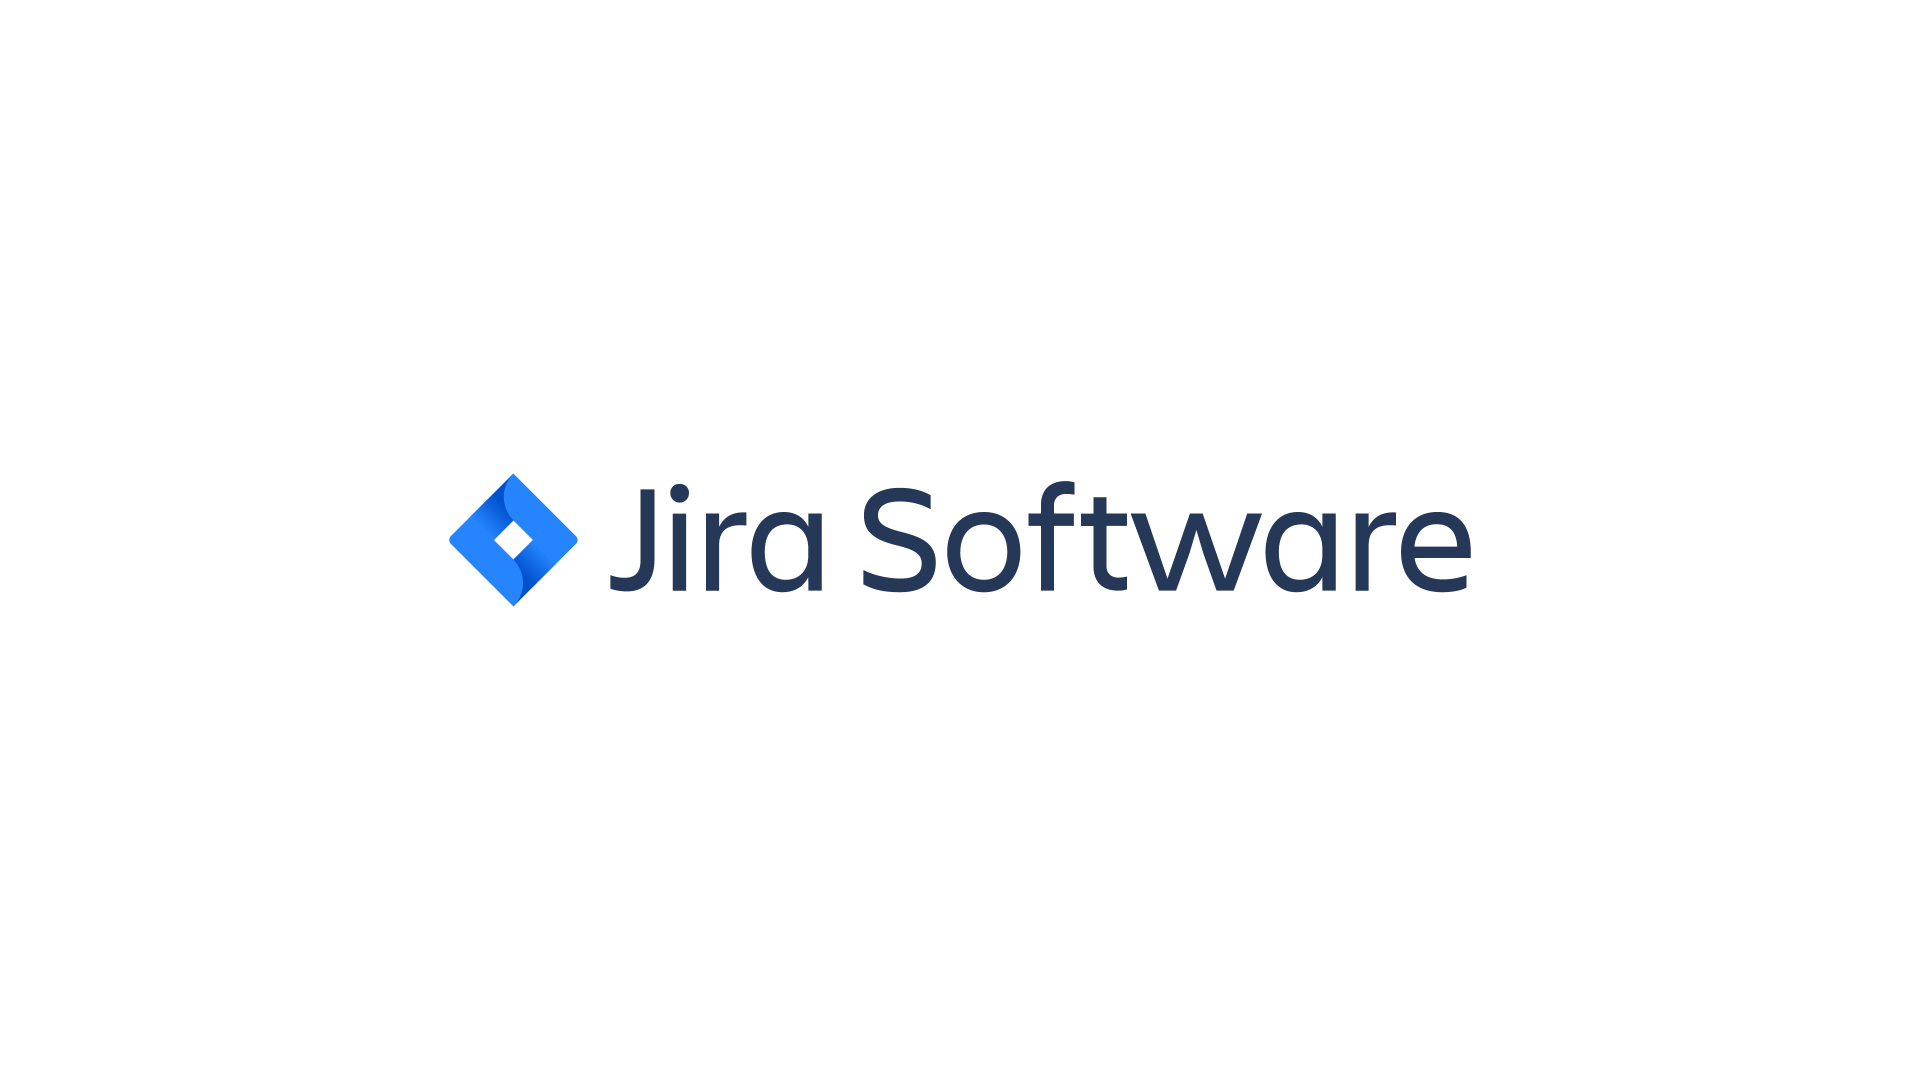 Jira software logo with black text. 